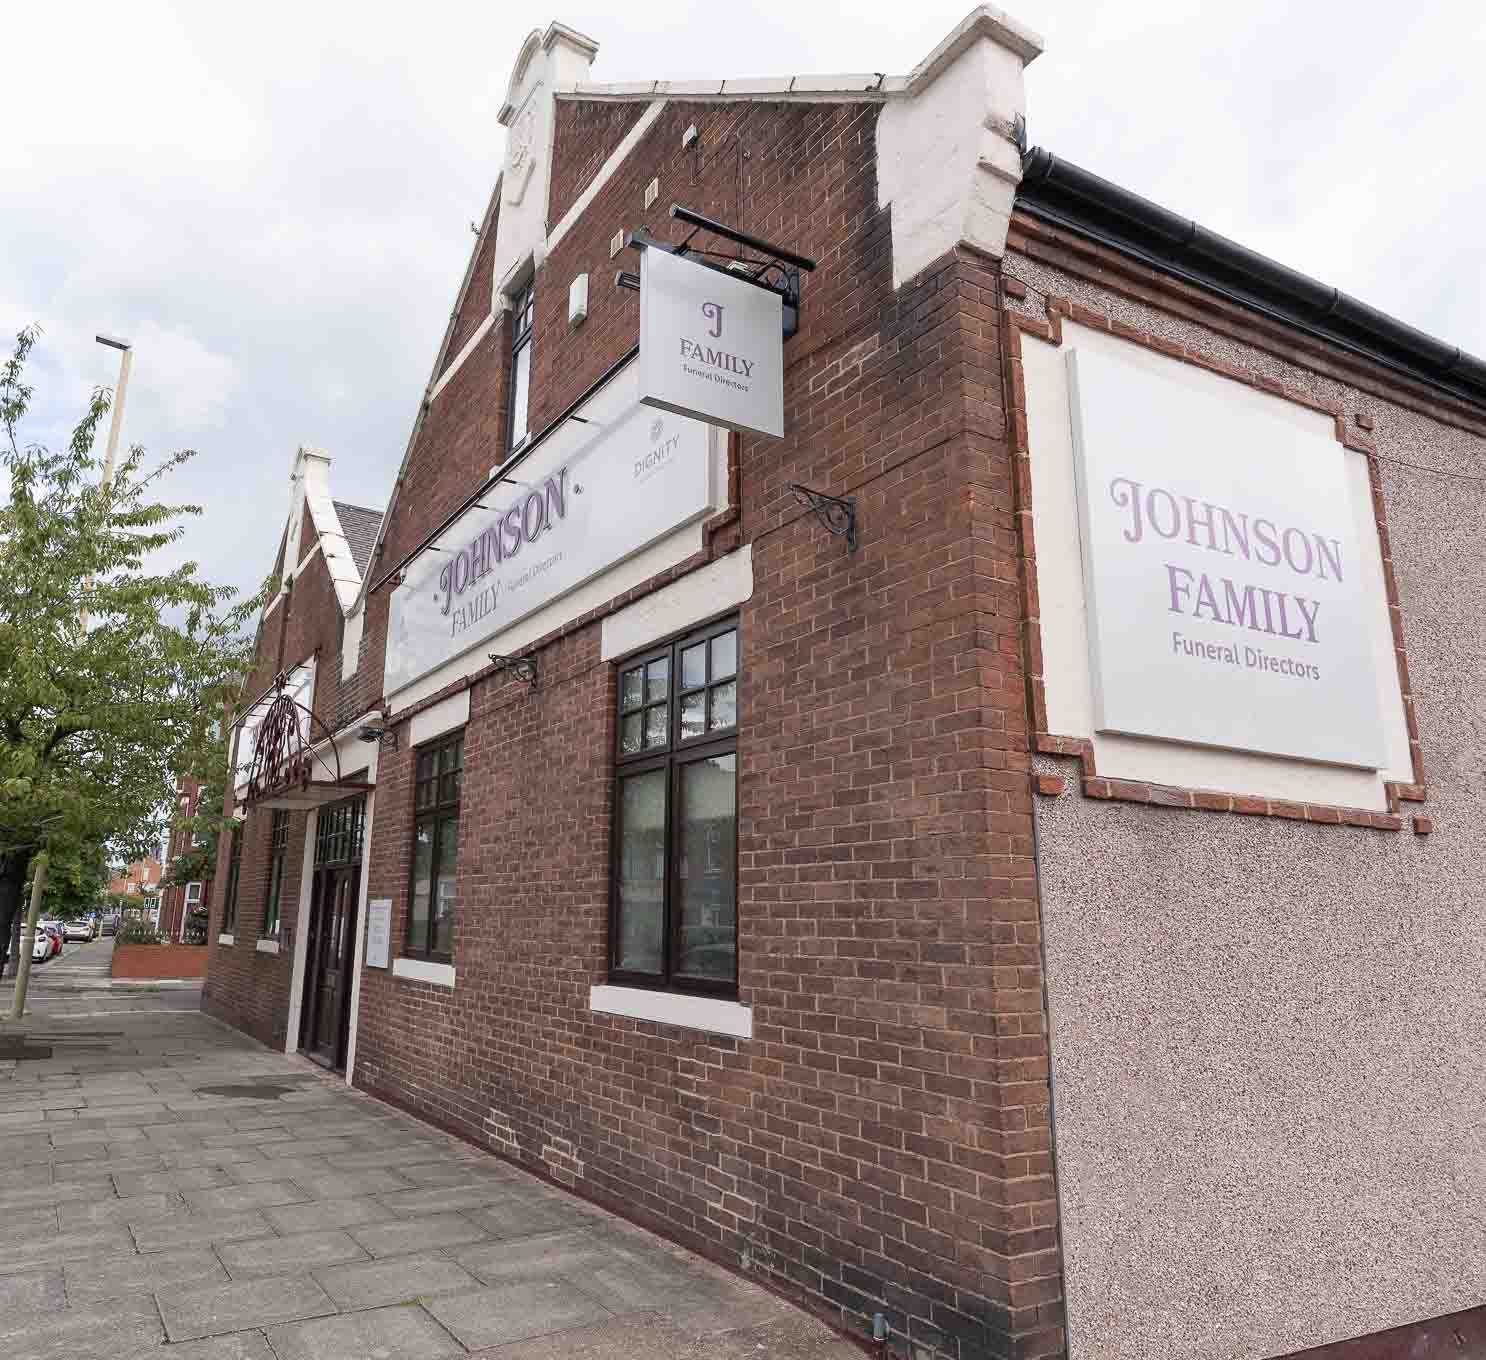 Johnson Family Funeral Home in Imeary South-Shields